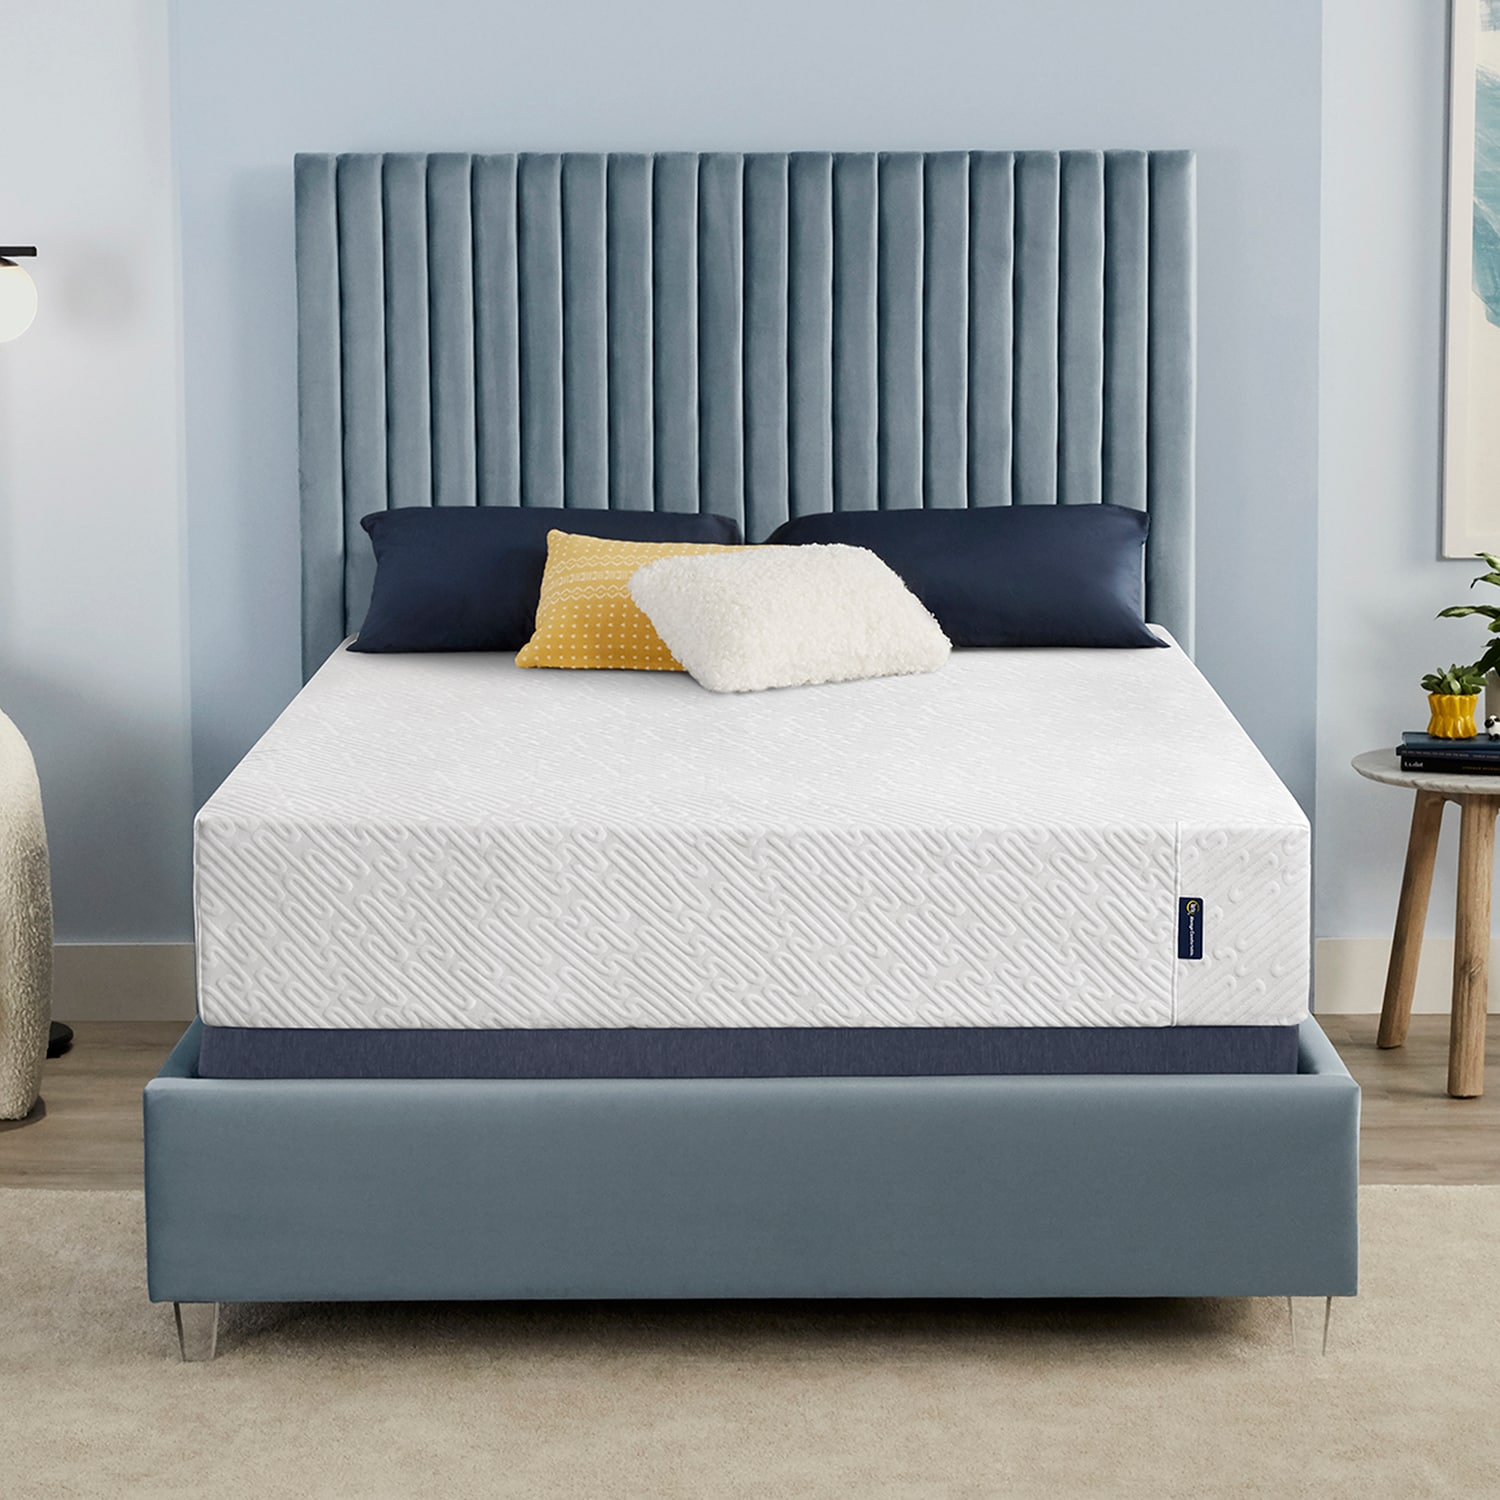 Sealy 12 Memory Foam Mattress-in-a-Box with Cool & Clean Cover - King